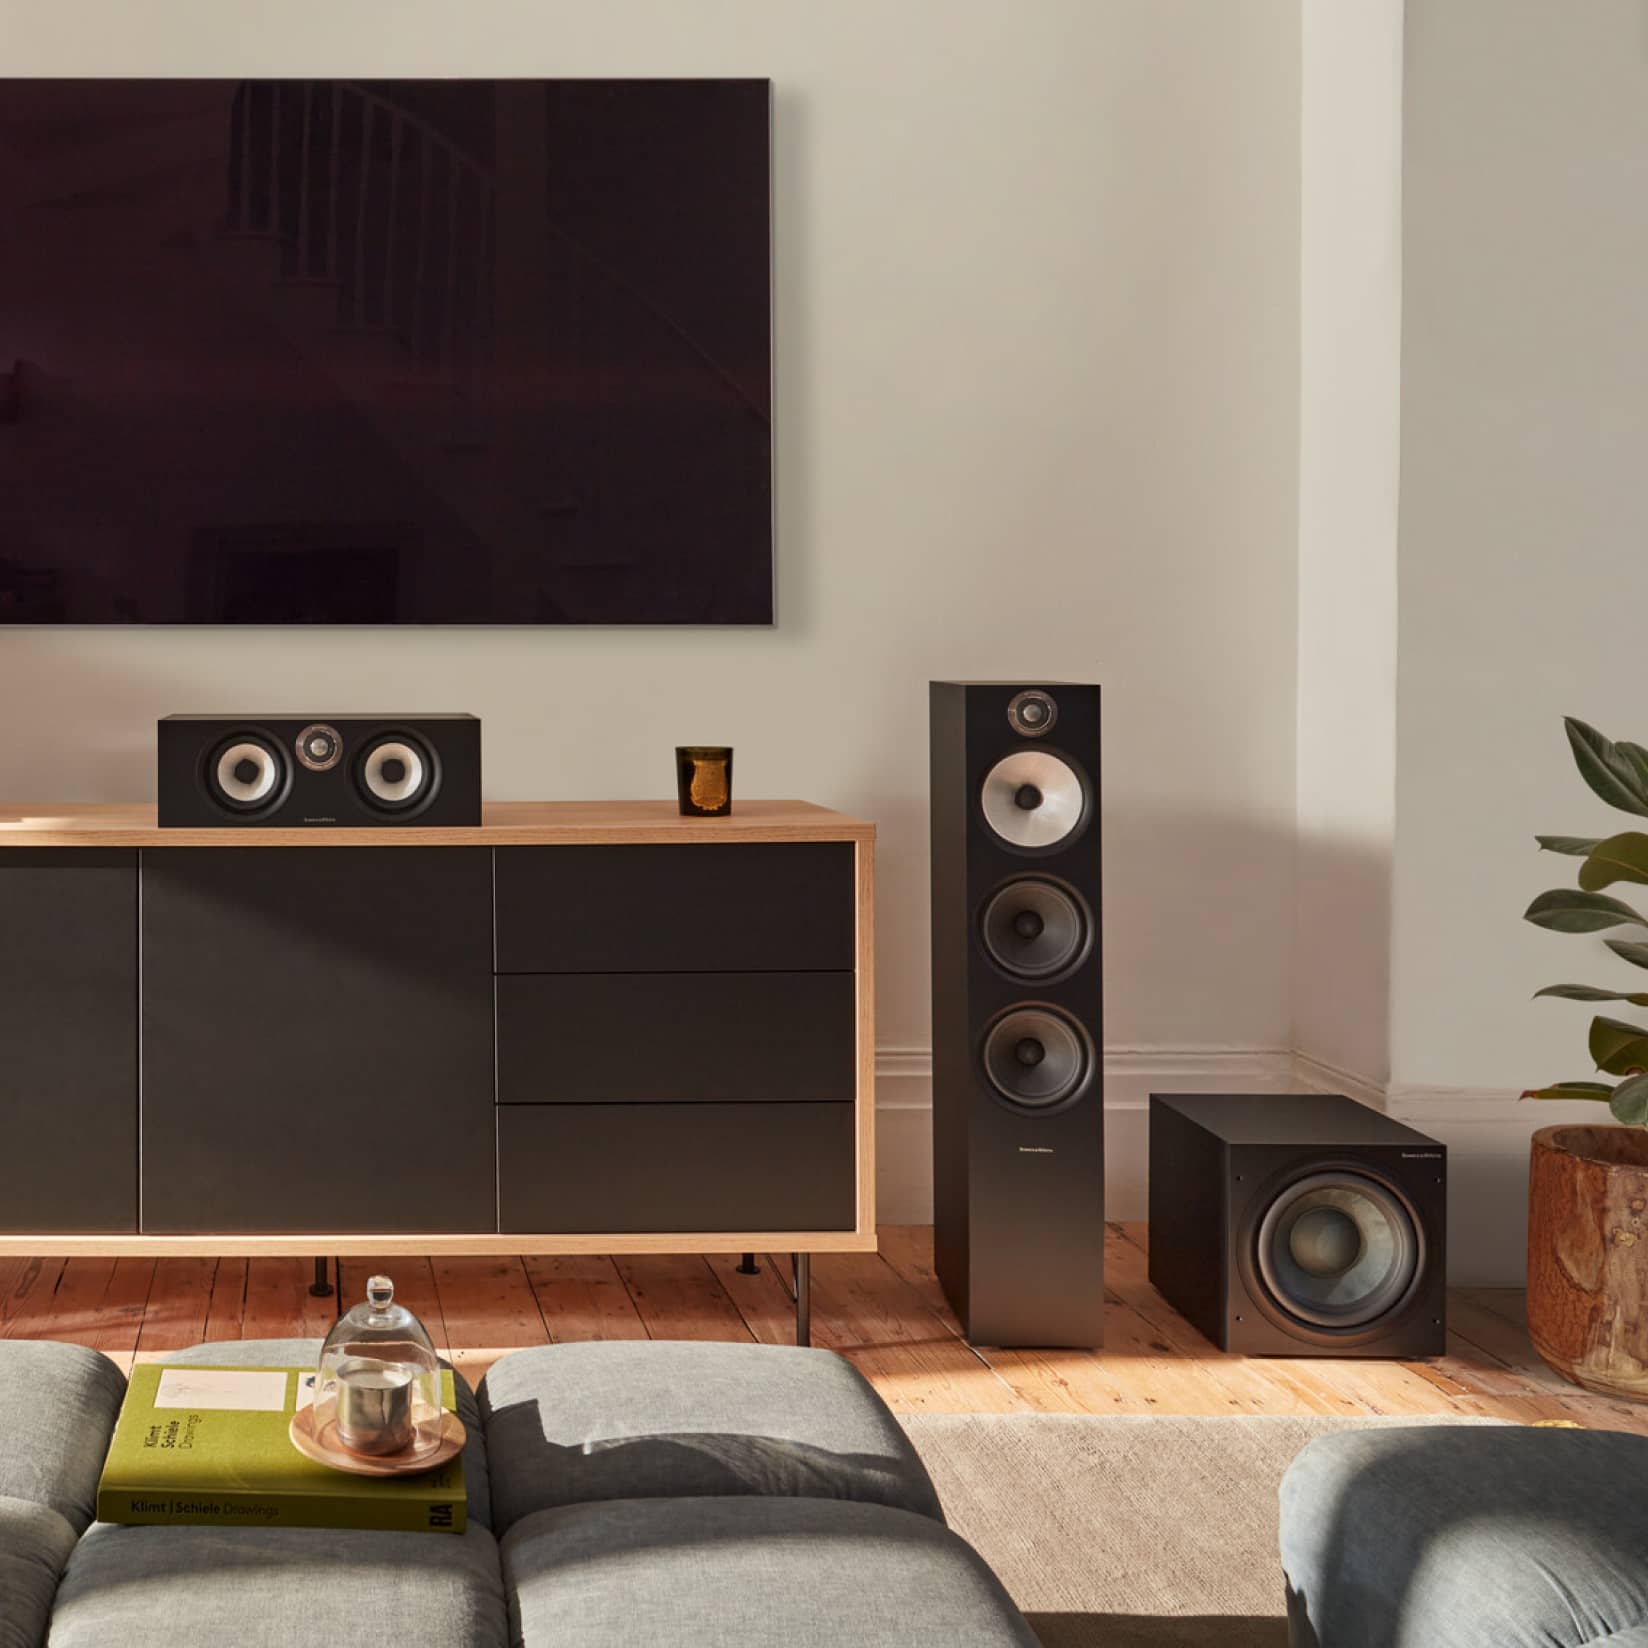 Forkert læbe Kloster ASW608 Subwoofer | Bowers & Wilkins